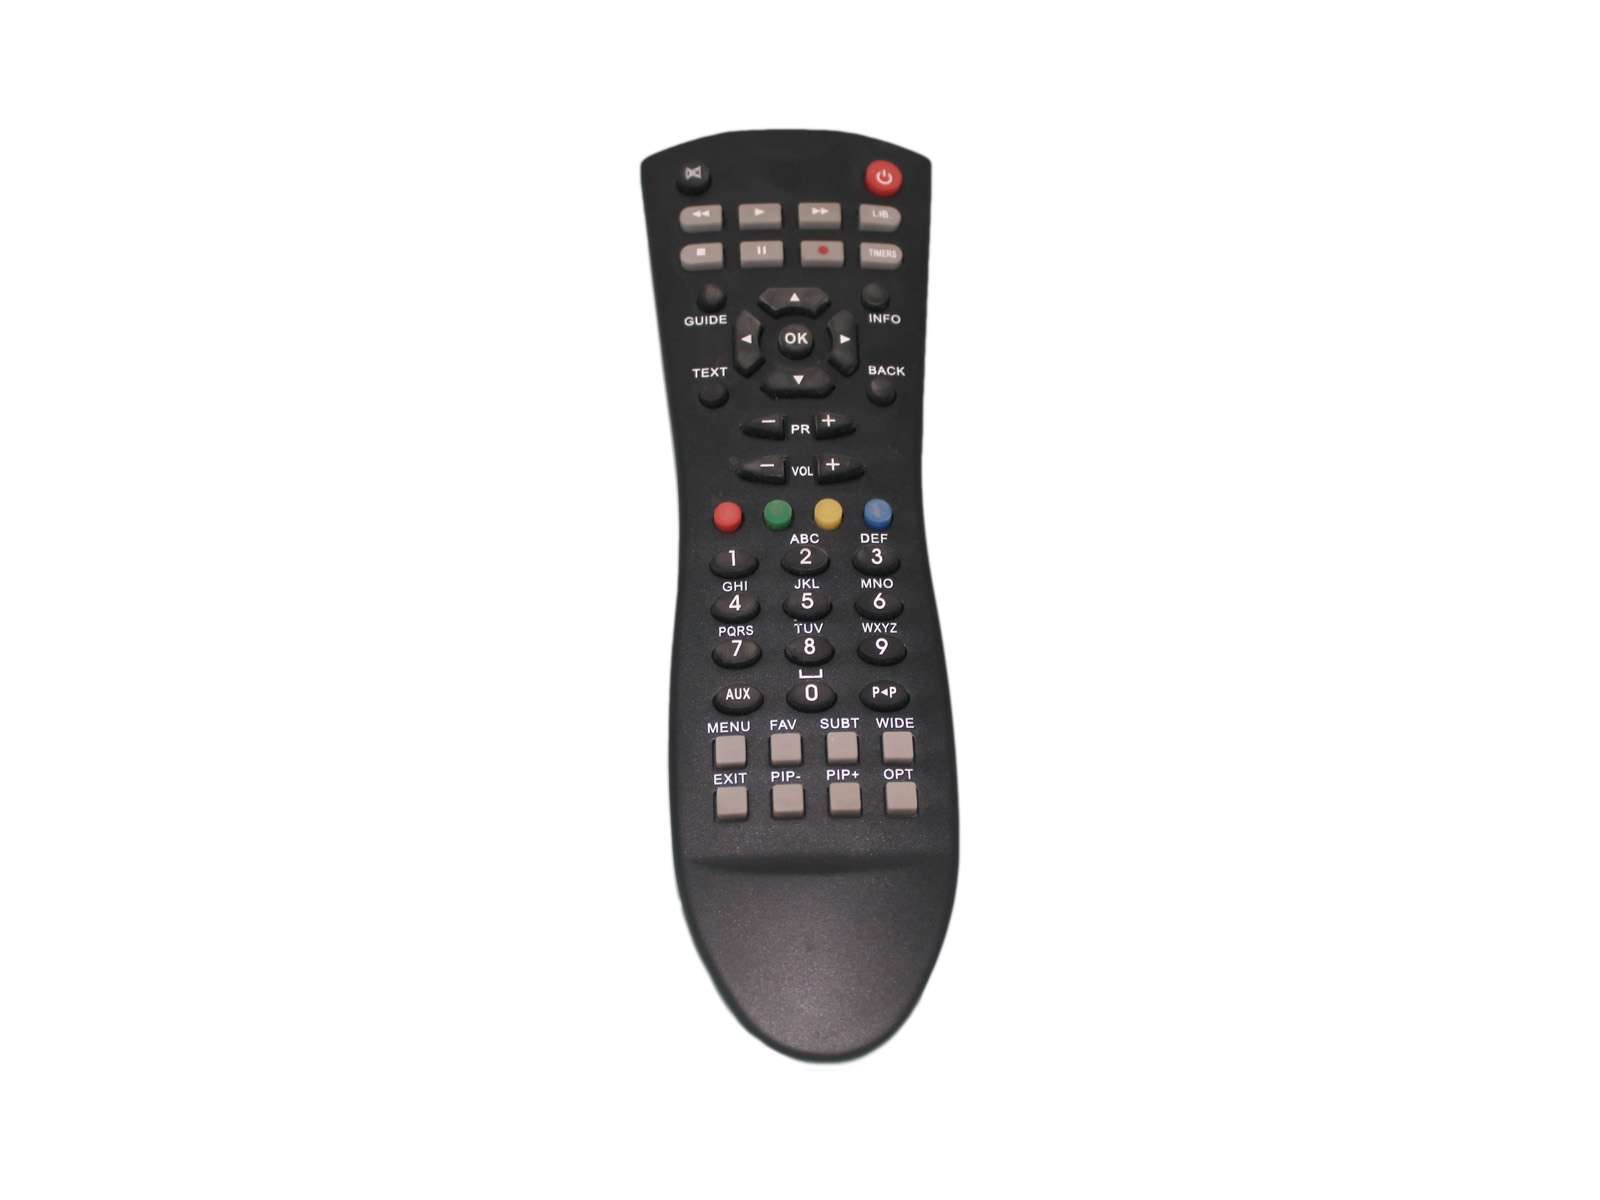 CLASSIC IRC83079 REPLACEMENT PACIFIC PSTB0802 REMOTE CONTROL